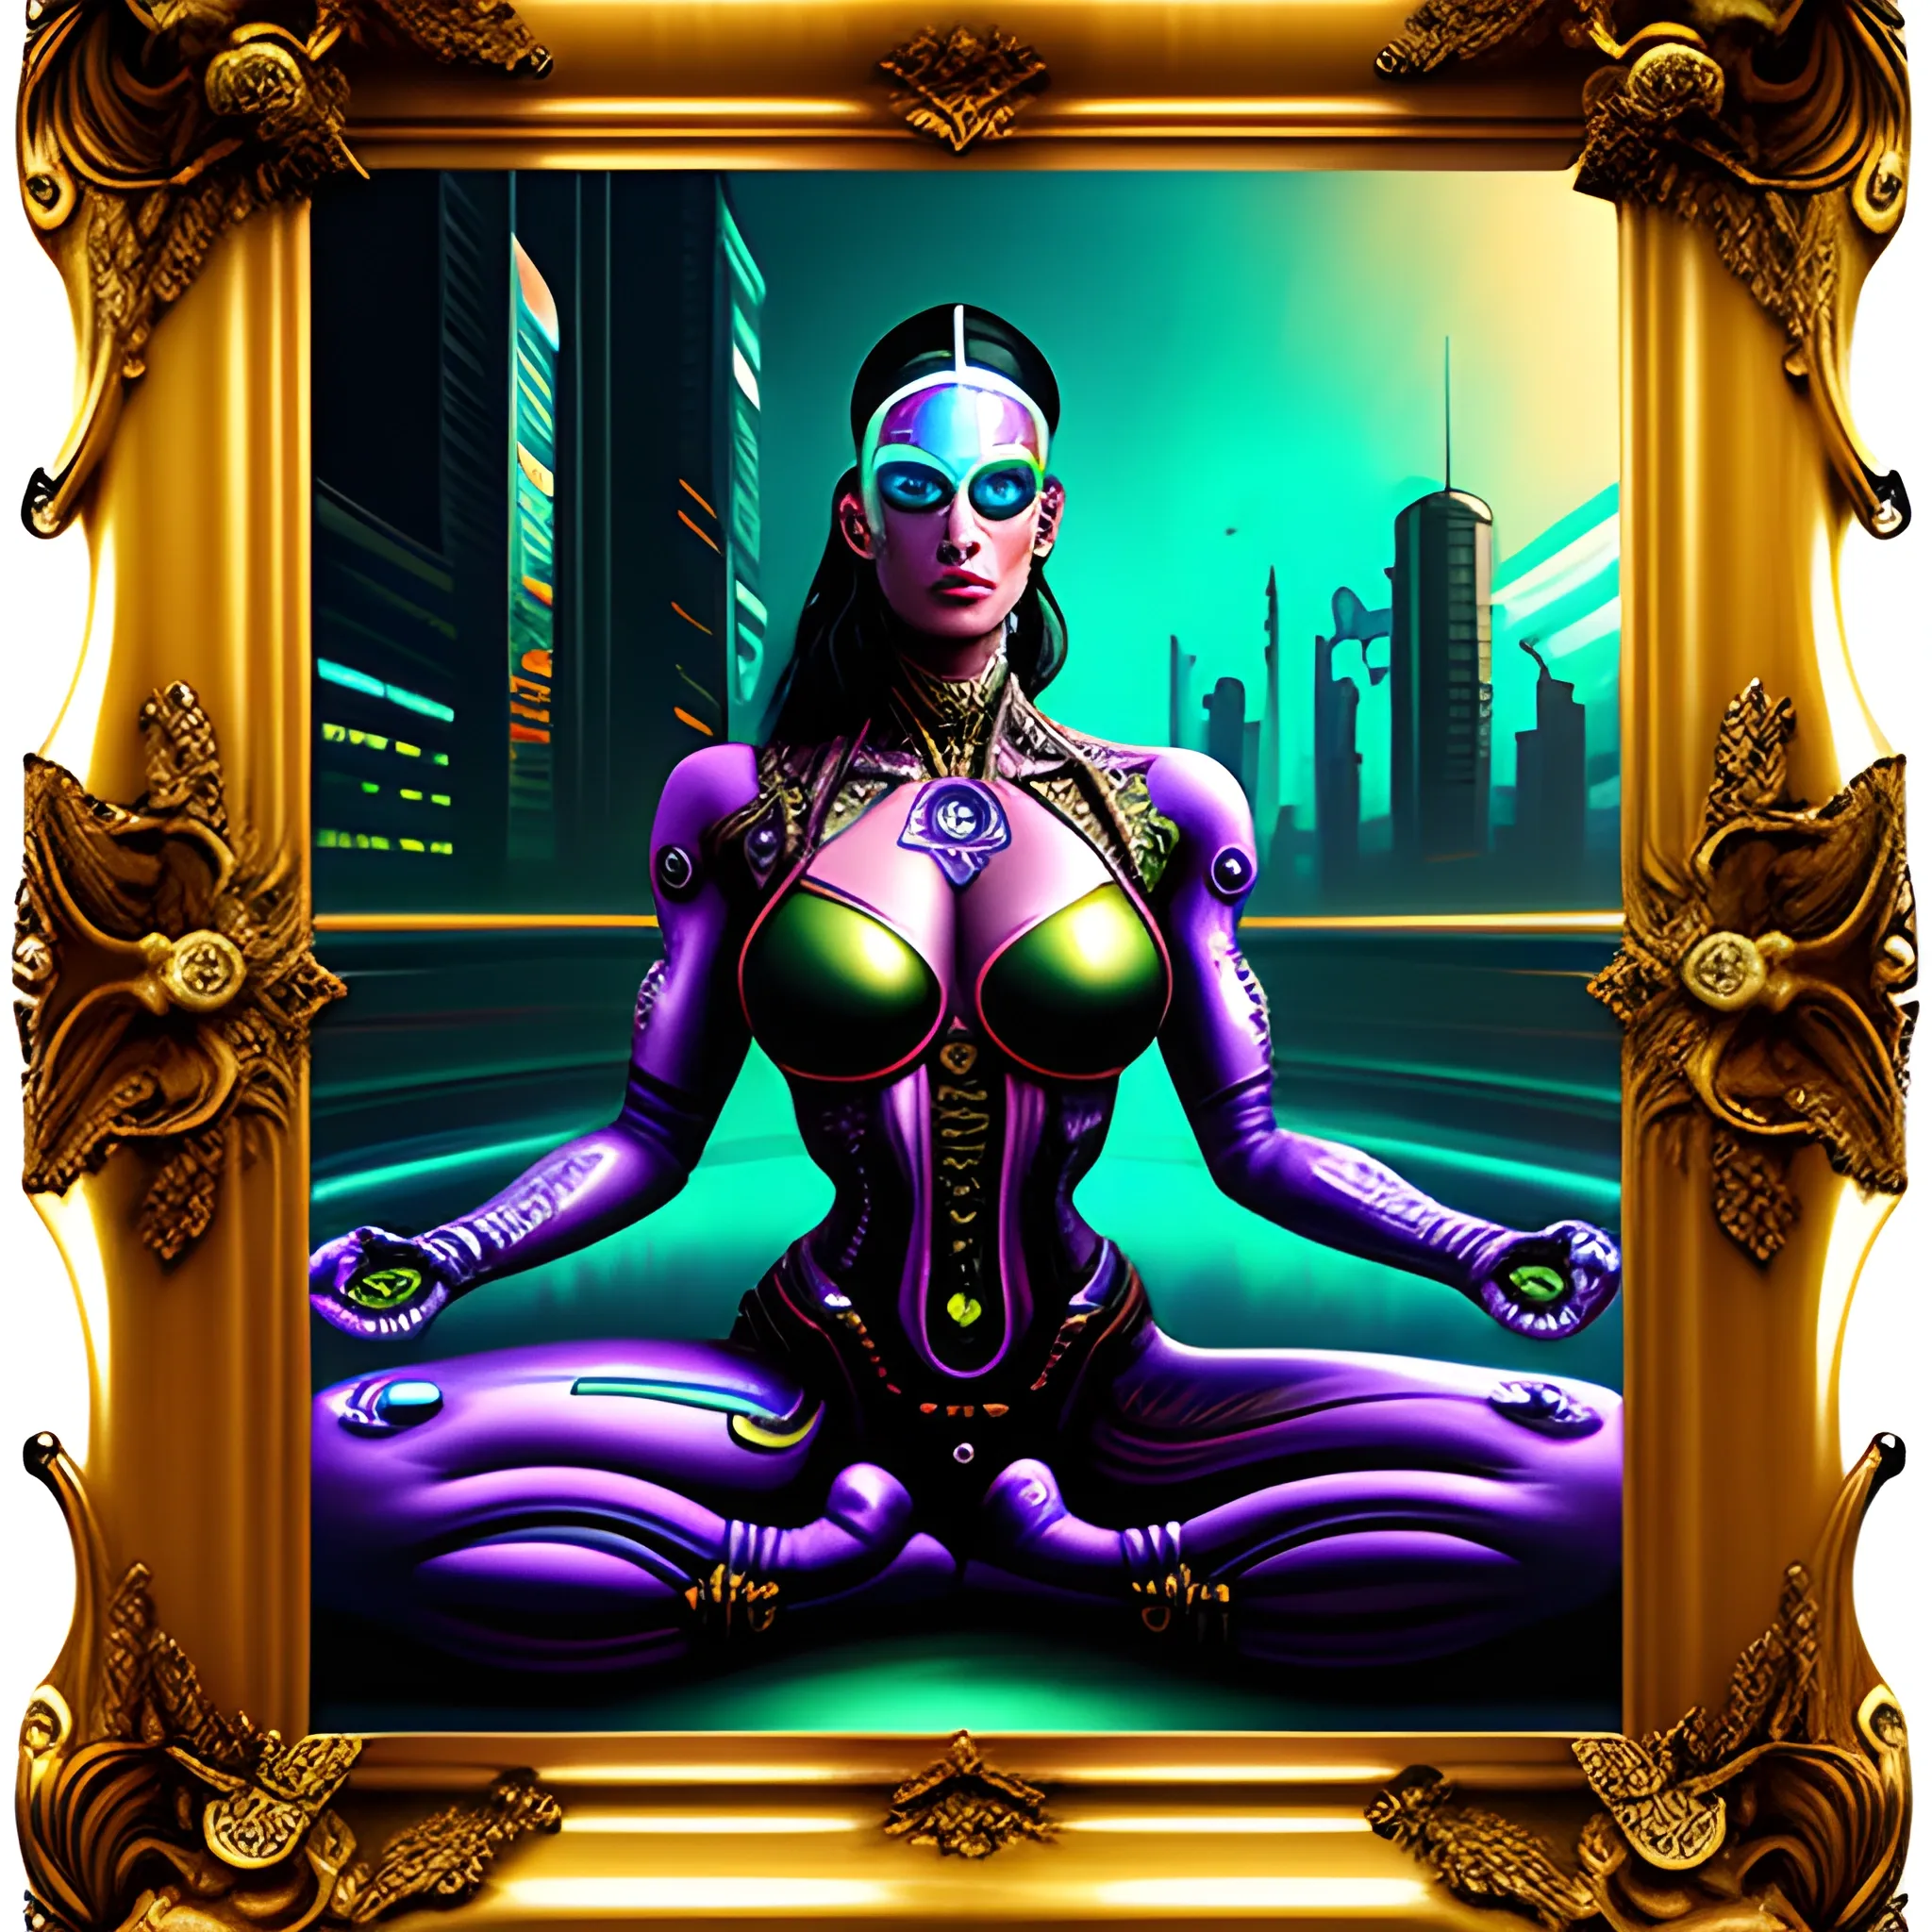 , Trippy, A GIRL IN A YOGA POSITION, CYBERPUNK STYLE, CYBORG, ROCOCO STYLE, Oil Painting